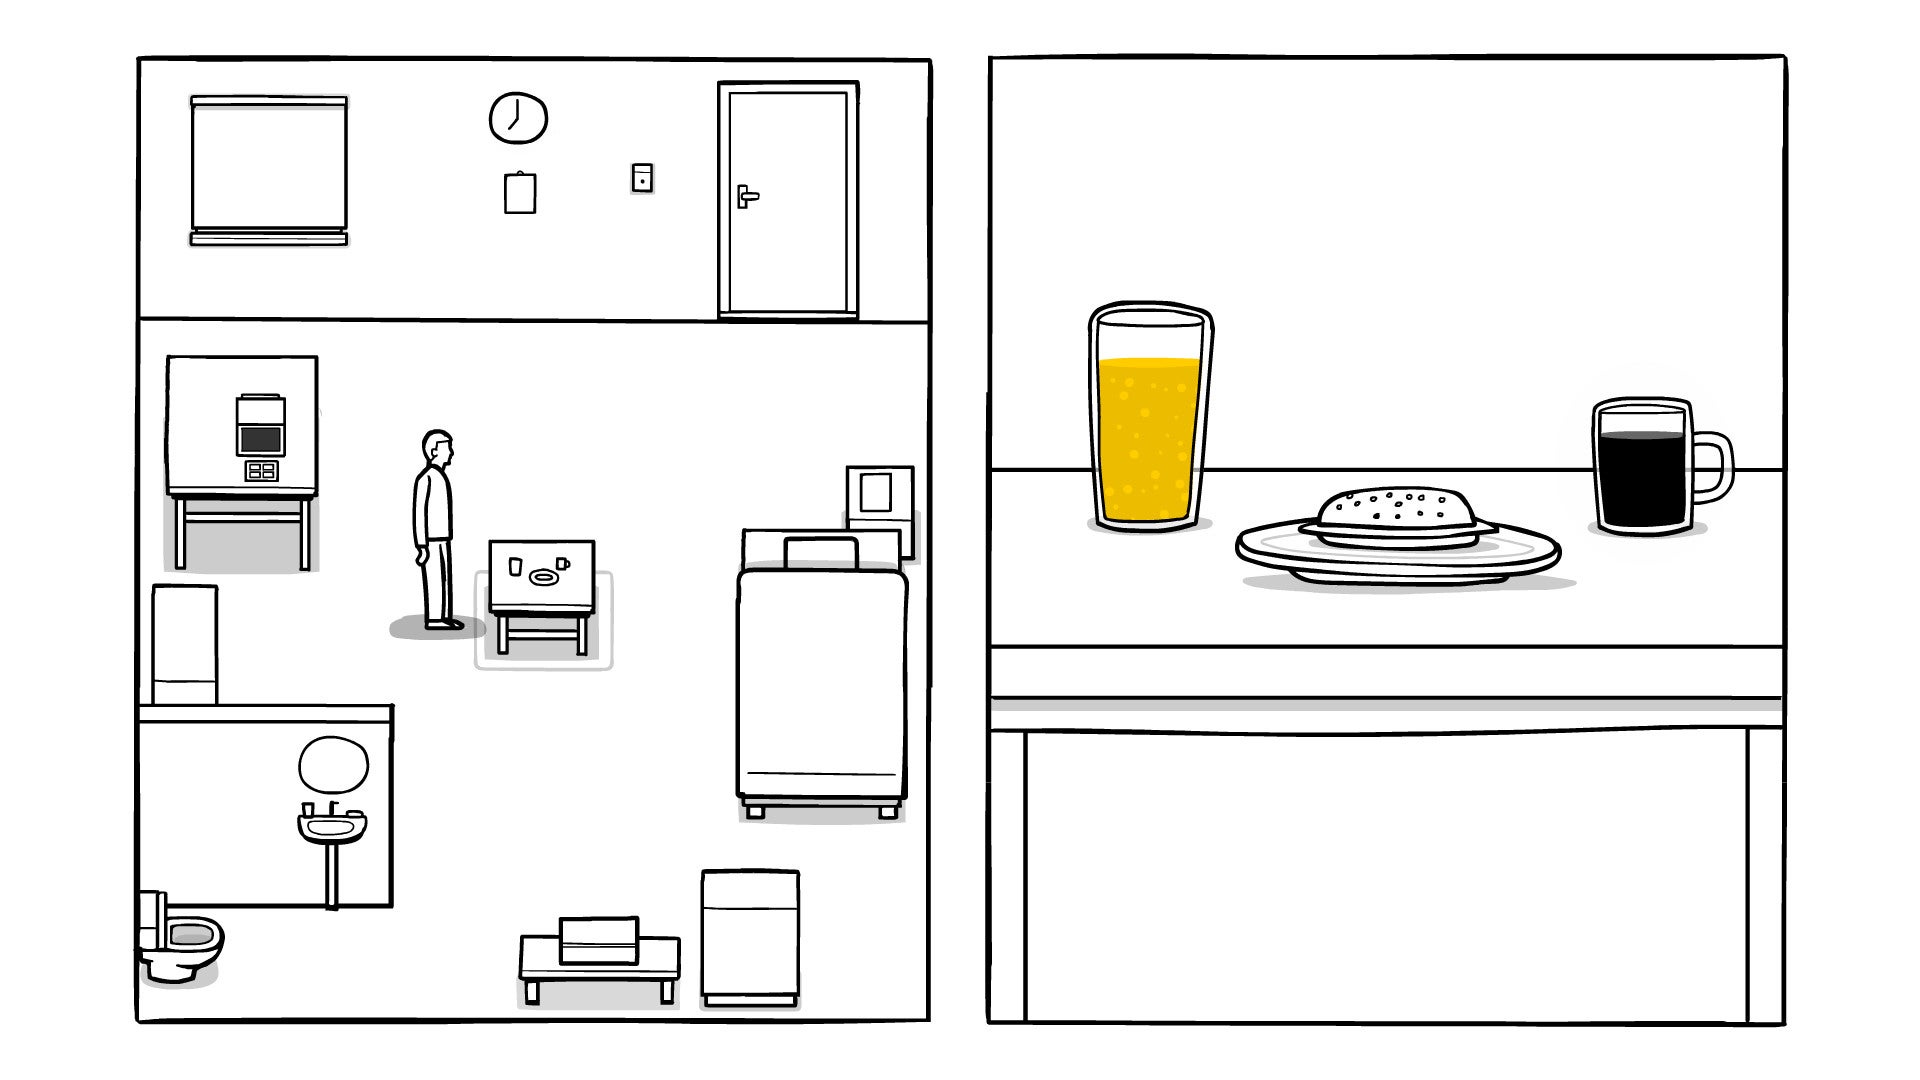 The protagonist of 2D puzzle game The White Door walks around his room on the left side of the screen, and looks at his breakfast - shown on a table on the right side of the screen